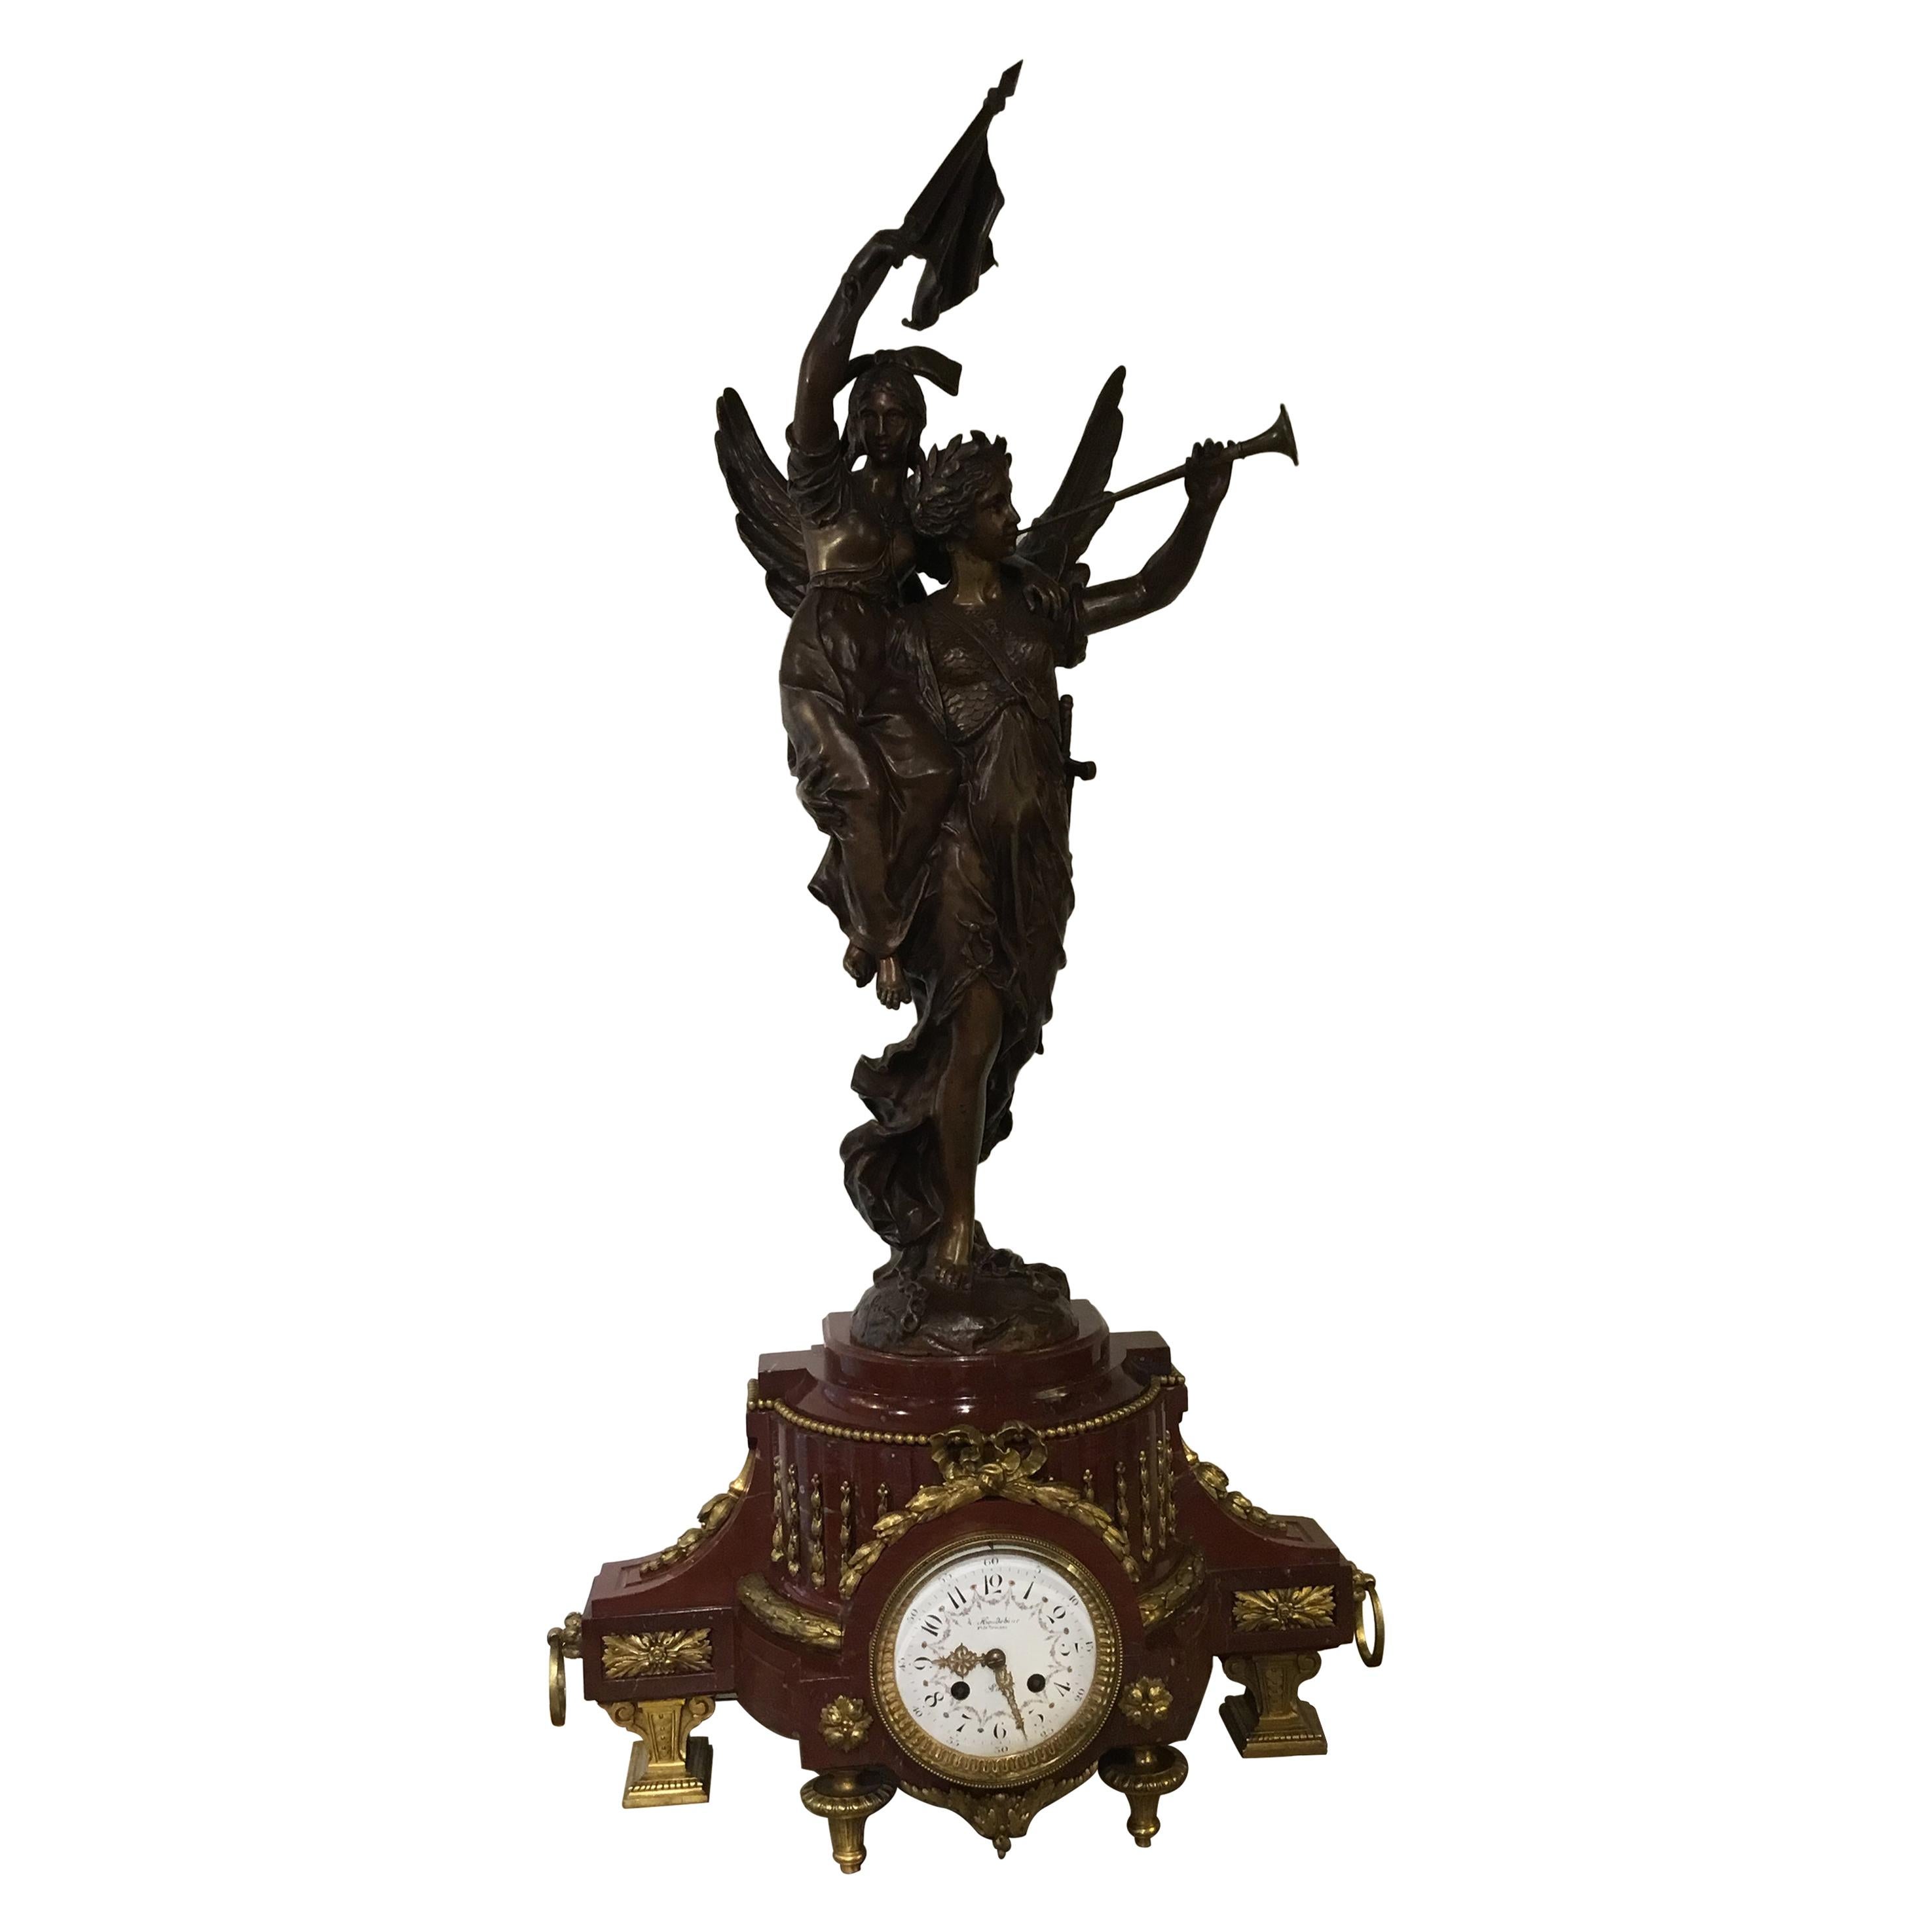 French Clock by H Koudebine, Paris with Figural Bronze by Charles Anfrie